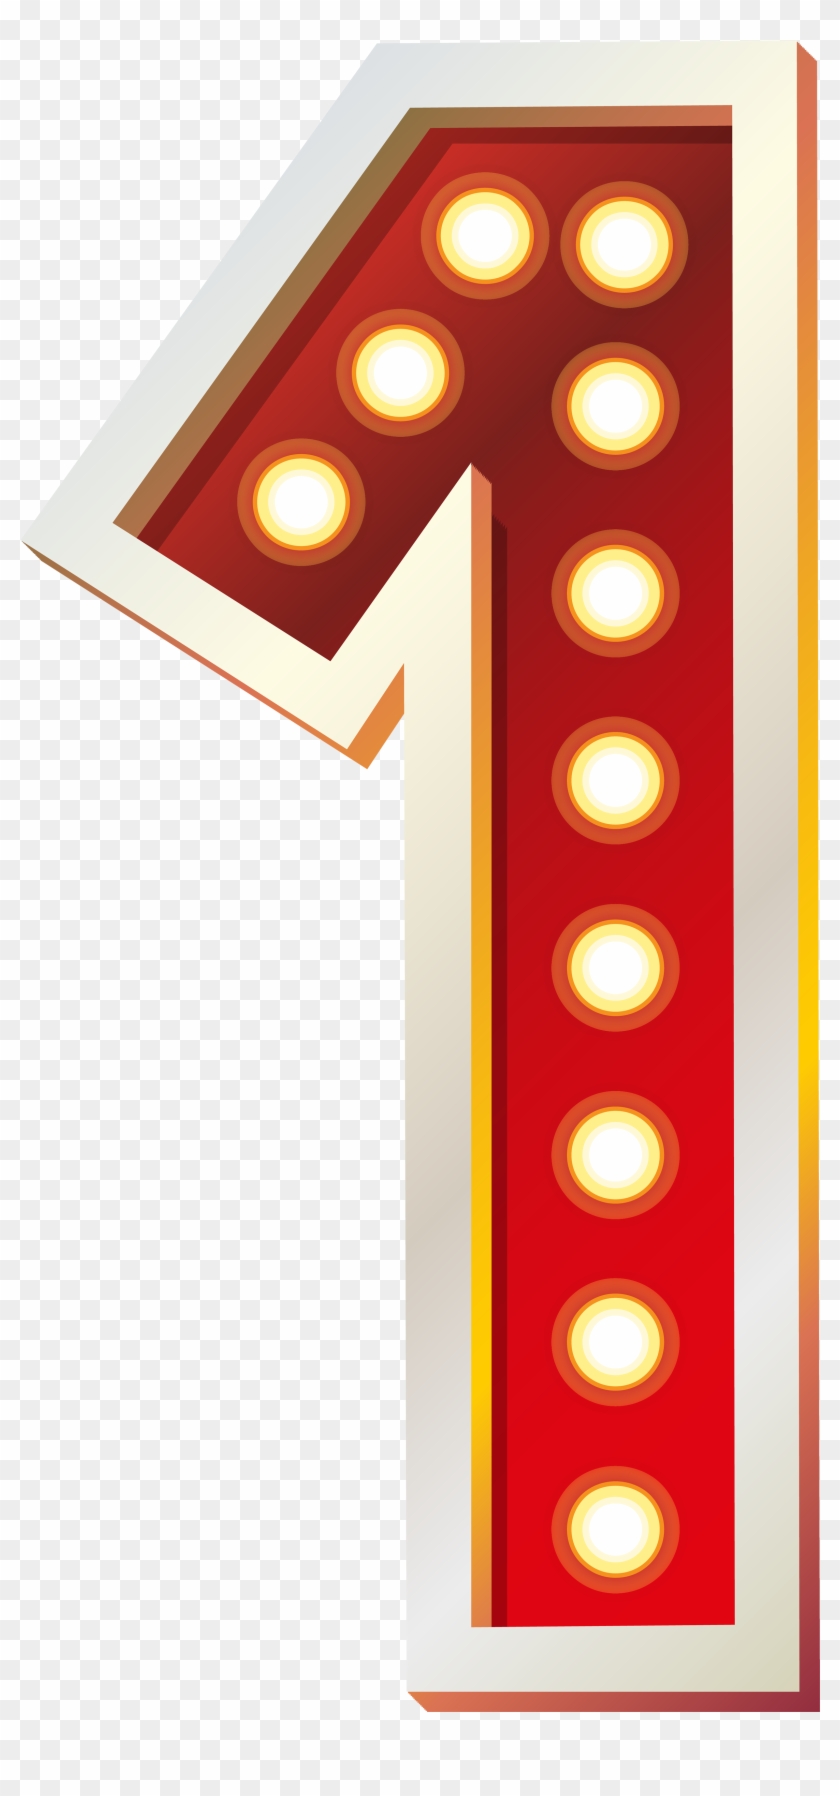 Red Number One With Lights Png Clip Art Image - Number 1 In Lights Transparent Png #553554